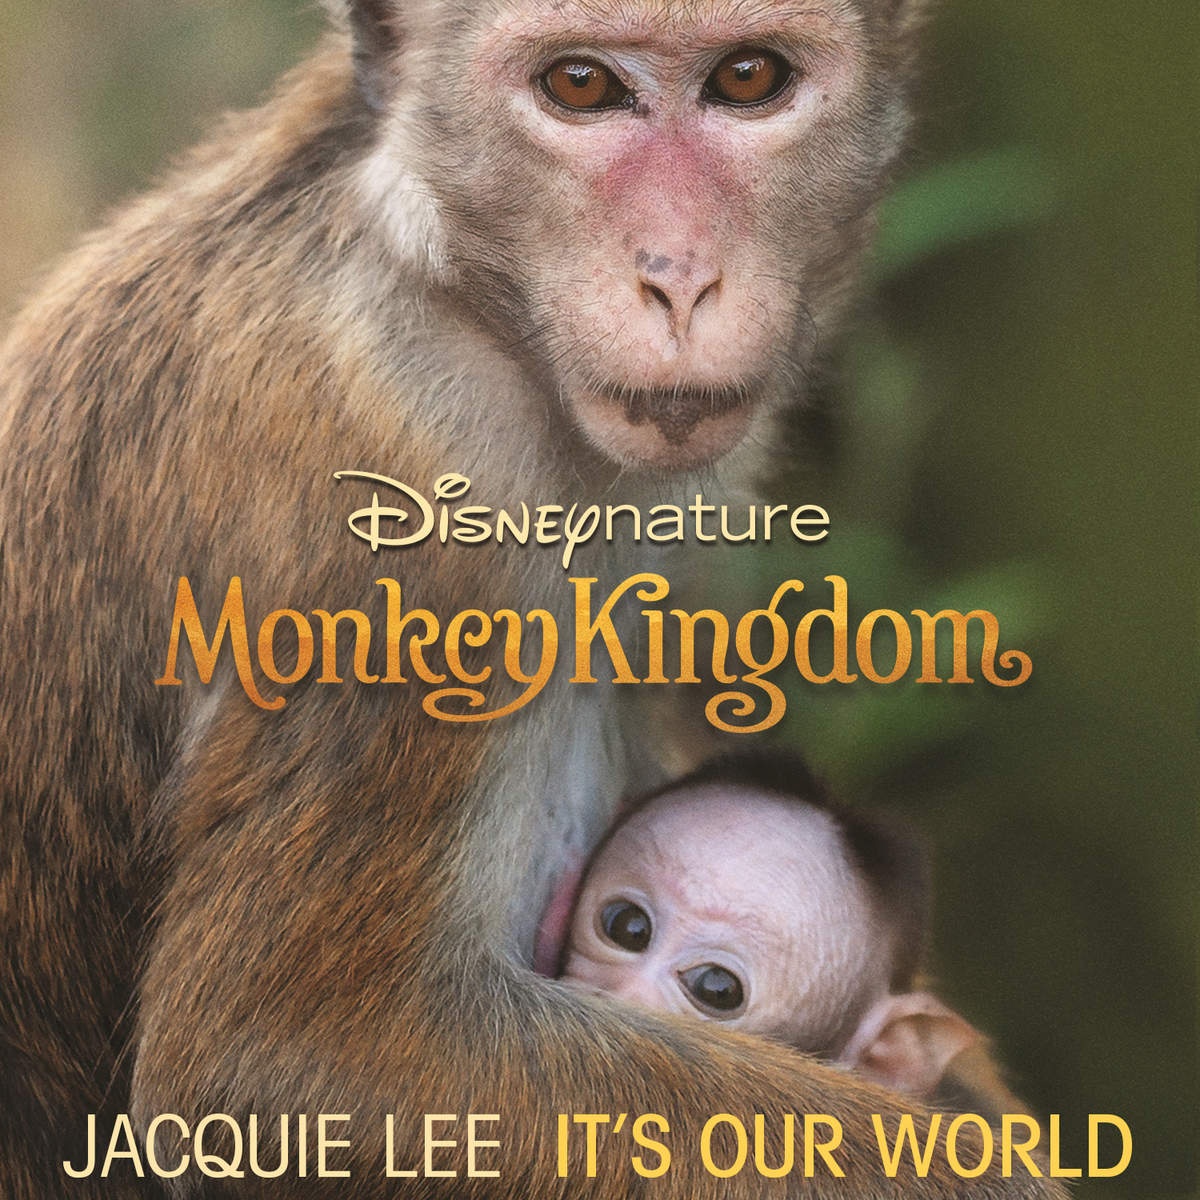 It's Our World (From "Disneynature: Monkey Kingdom")